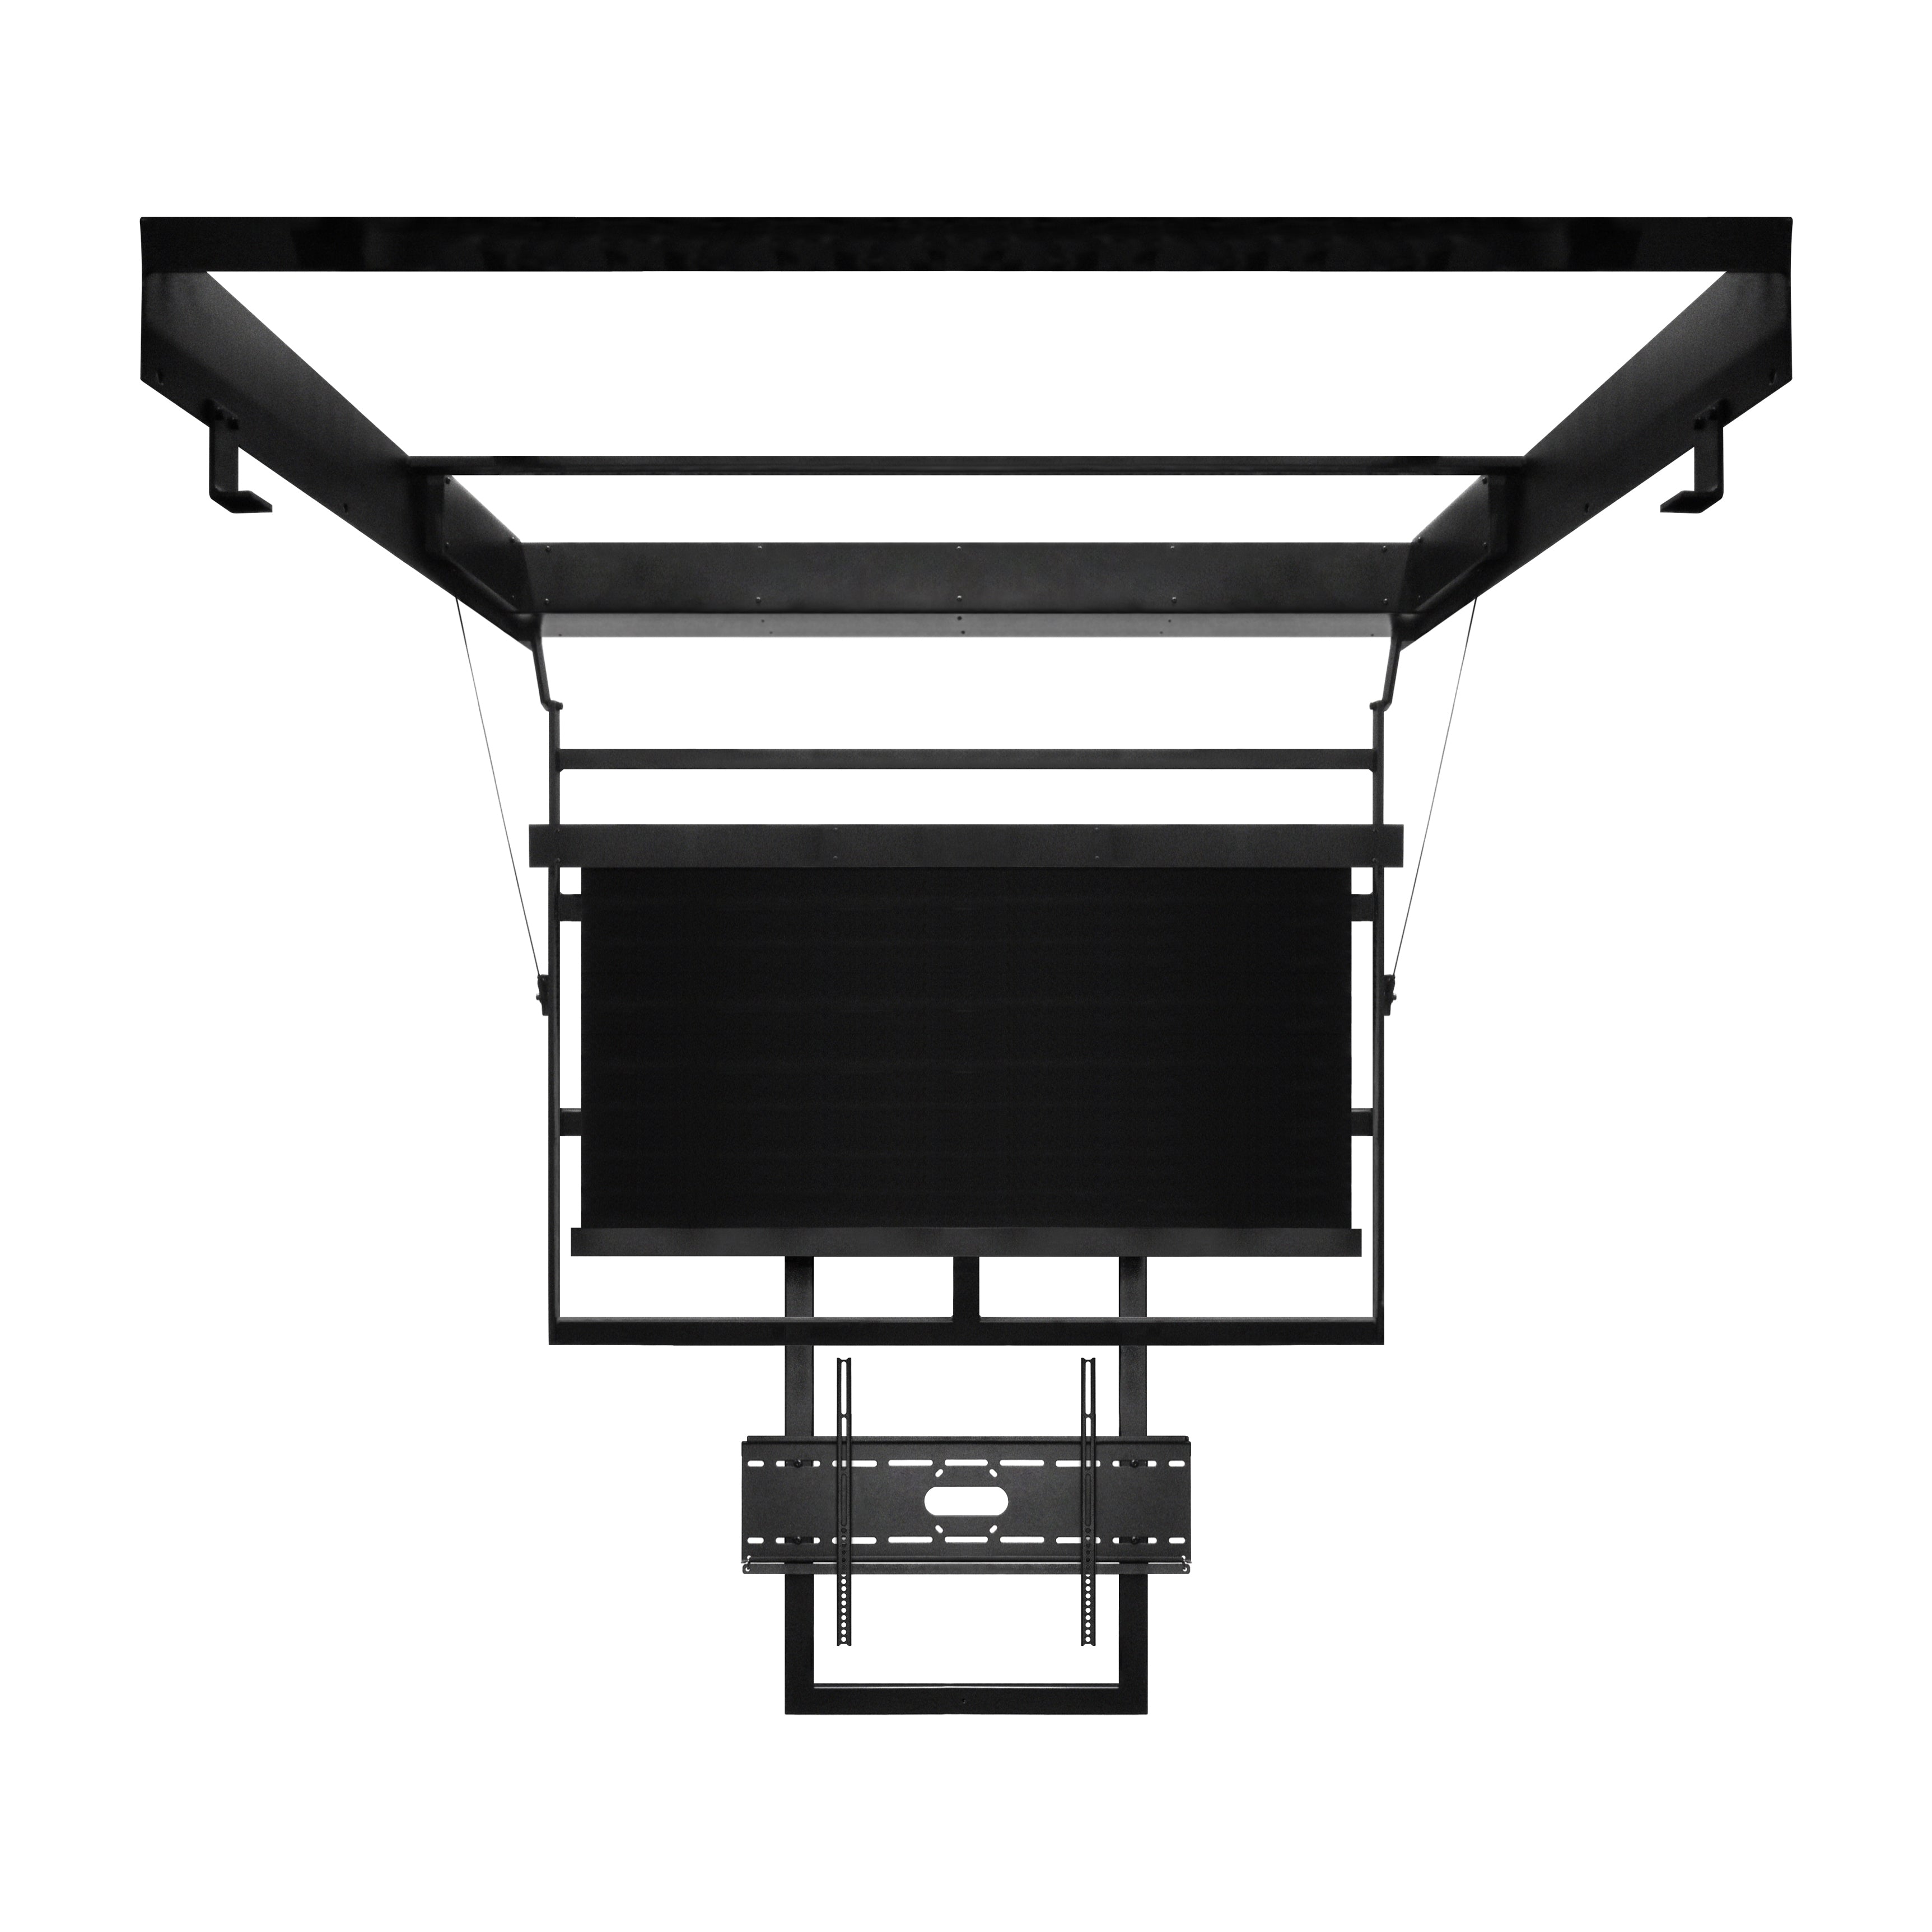 Flip-Down-Extend Mount For An 85 Inch Screen - Capacity: 150 Pounds - Extends 36 Inches - Model FD-150-X36-85 - Auton Motorized Systems